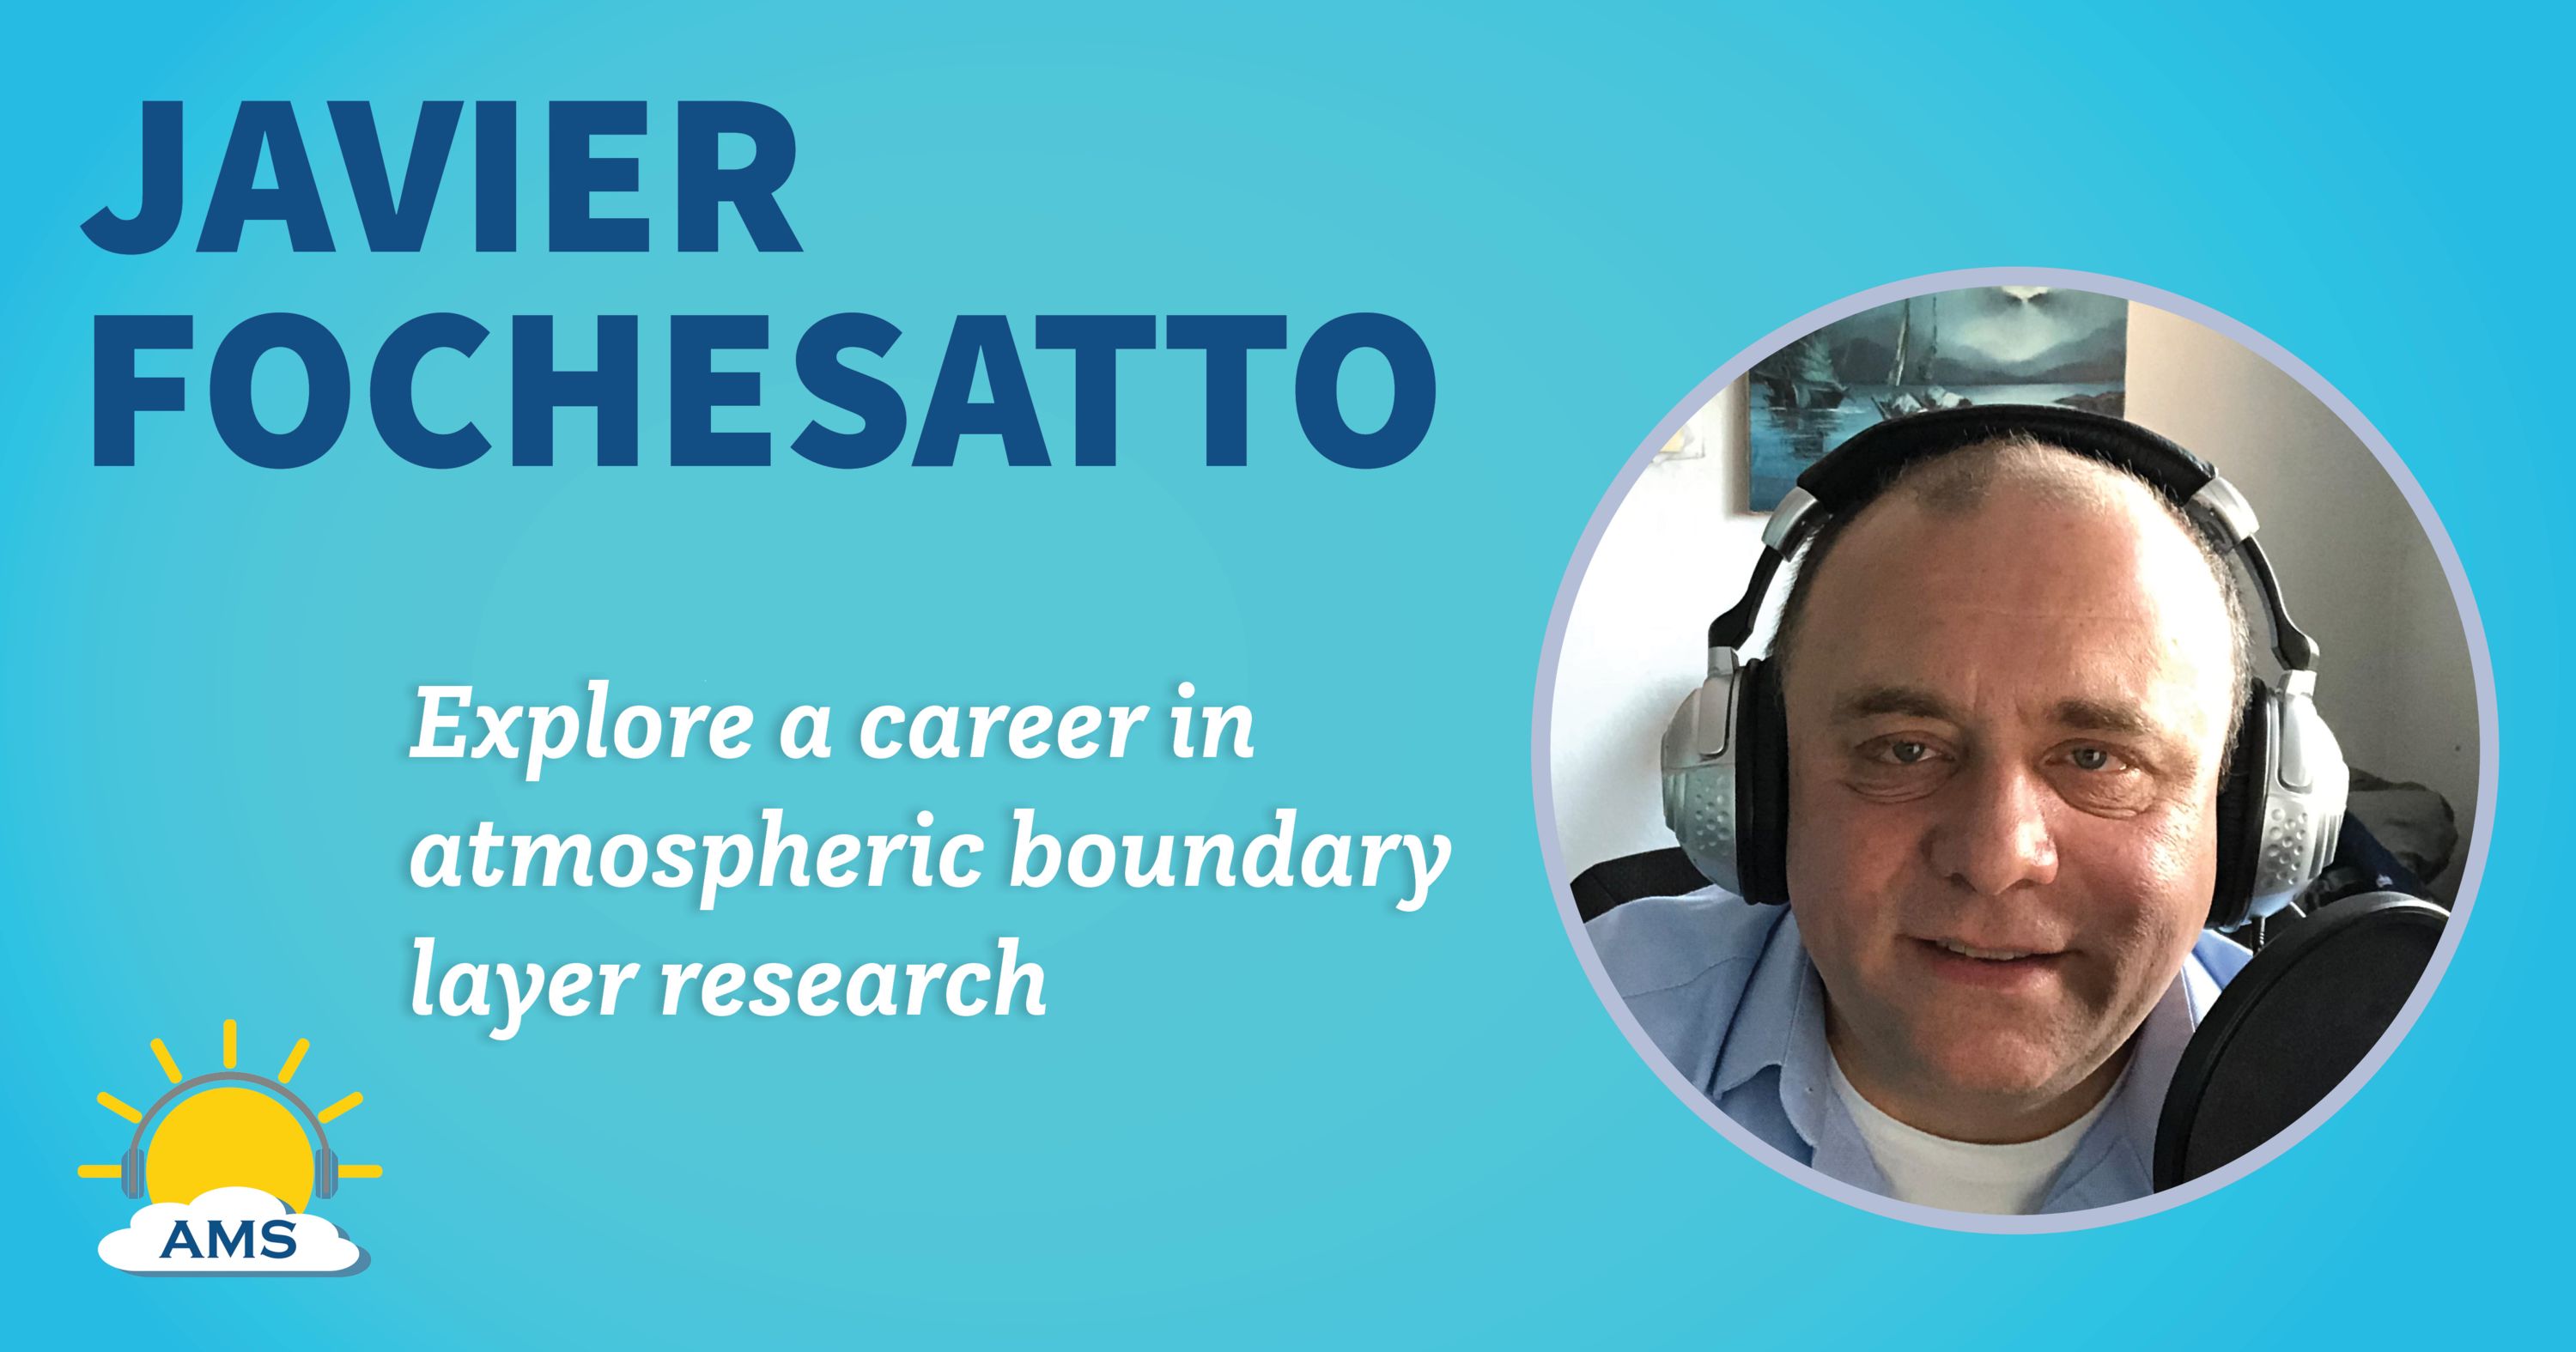 javier fochesatto headshot graphic with teaser text that reads &quotexplore a career in atmospheric boundary layer research"